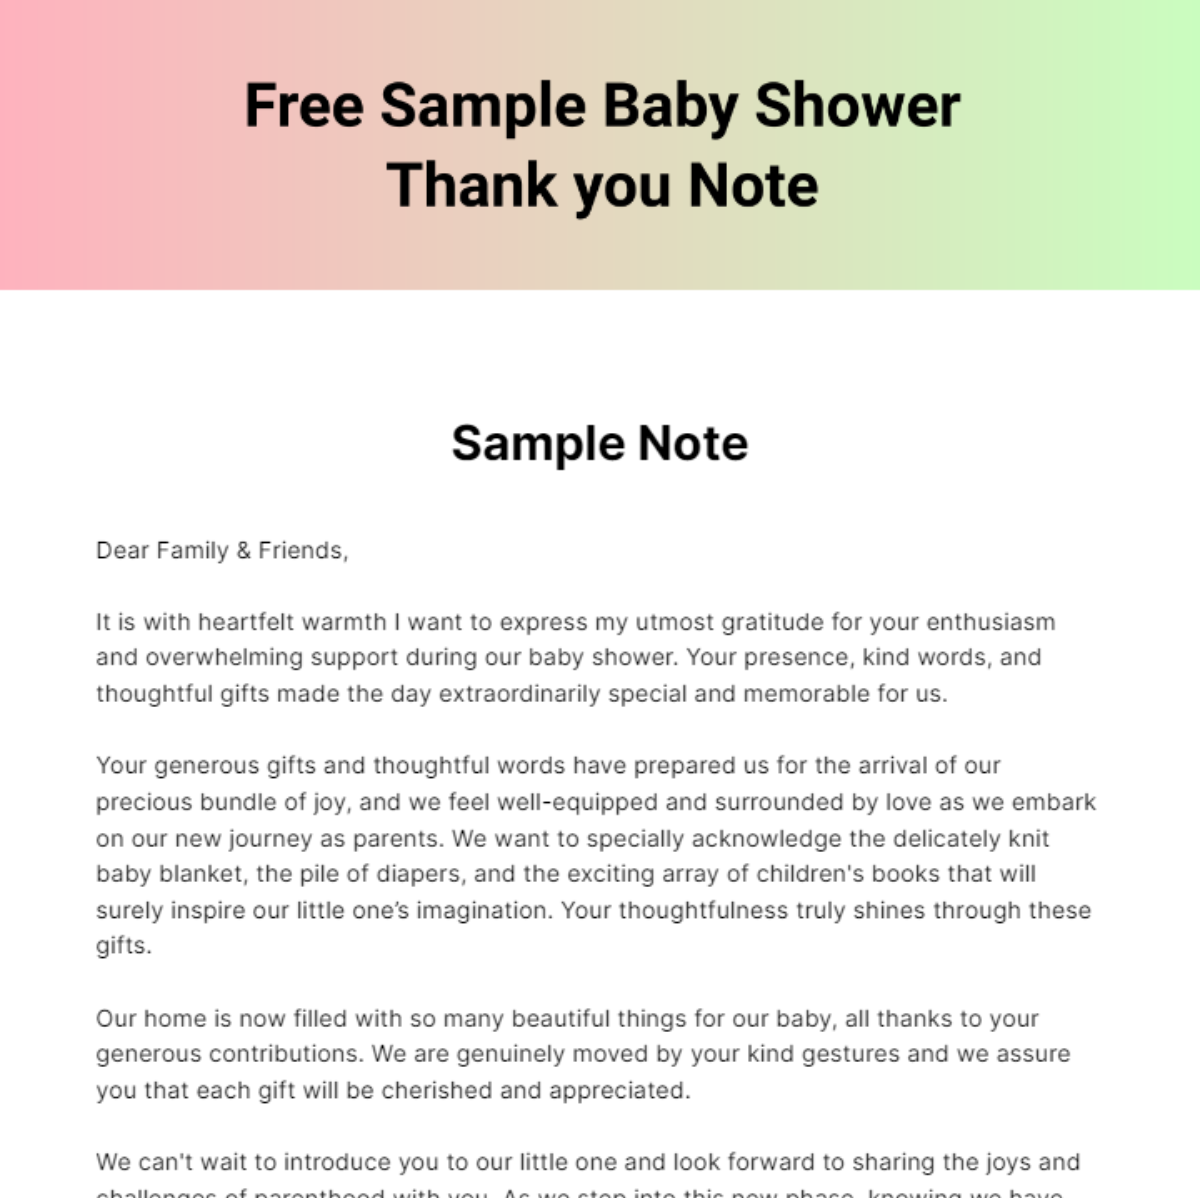 Free Sample Baby Shower Thank you Note Template